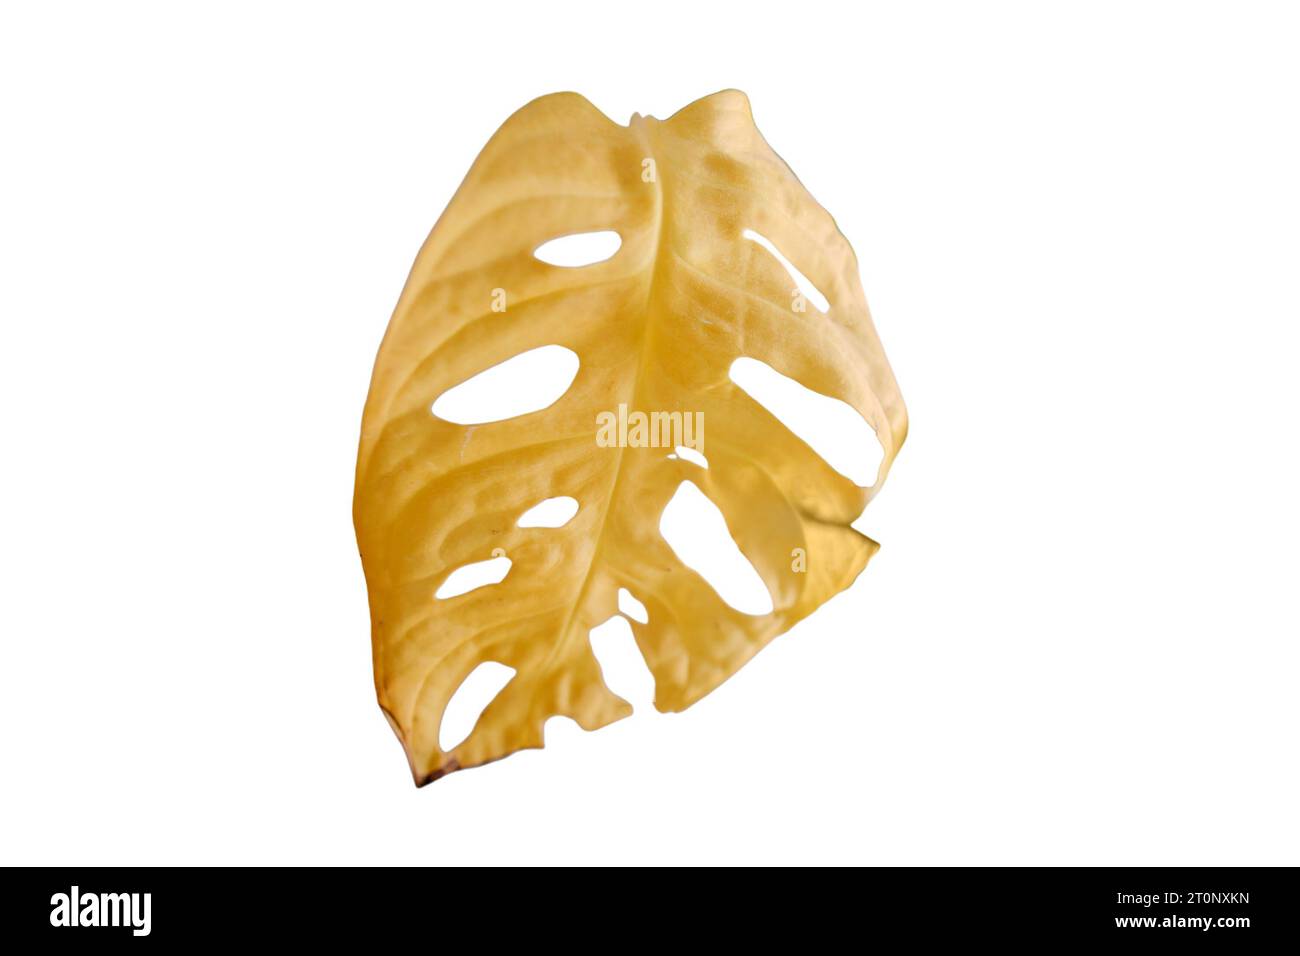 Monstera adansonii with withered yellow leaves, isolated on white background. Monstera monkey mask with houseplant disease Stock Photo